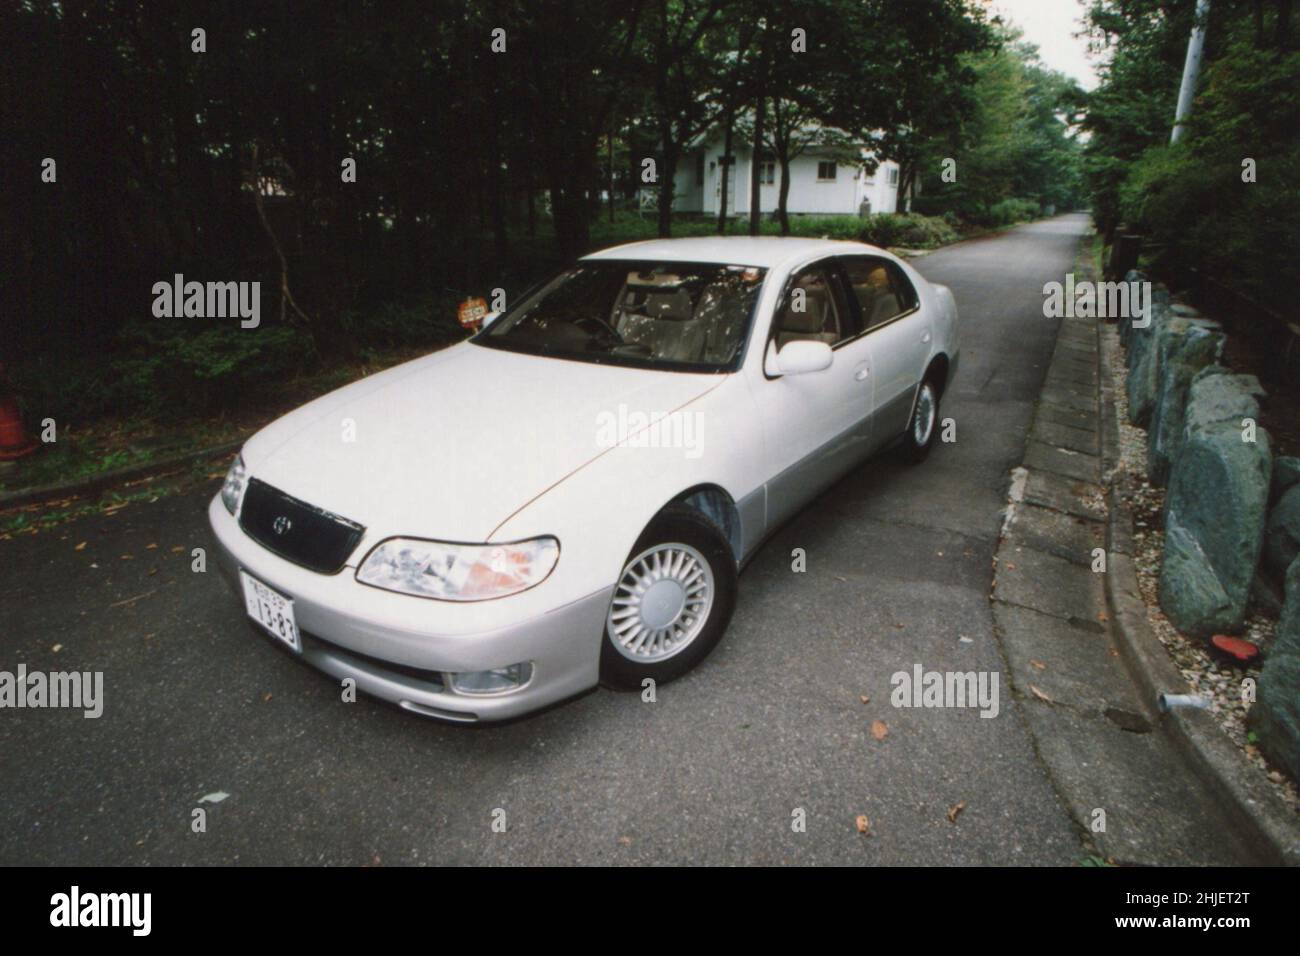 Toyota Car Aristo. Scanned Copy of Archival Photo Stock Photo